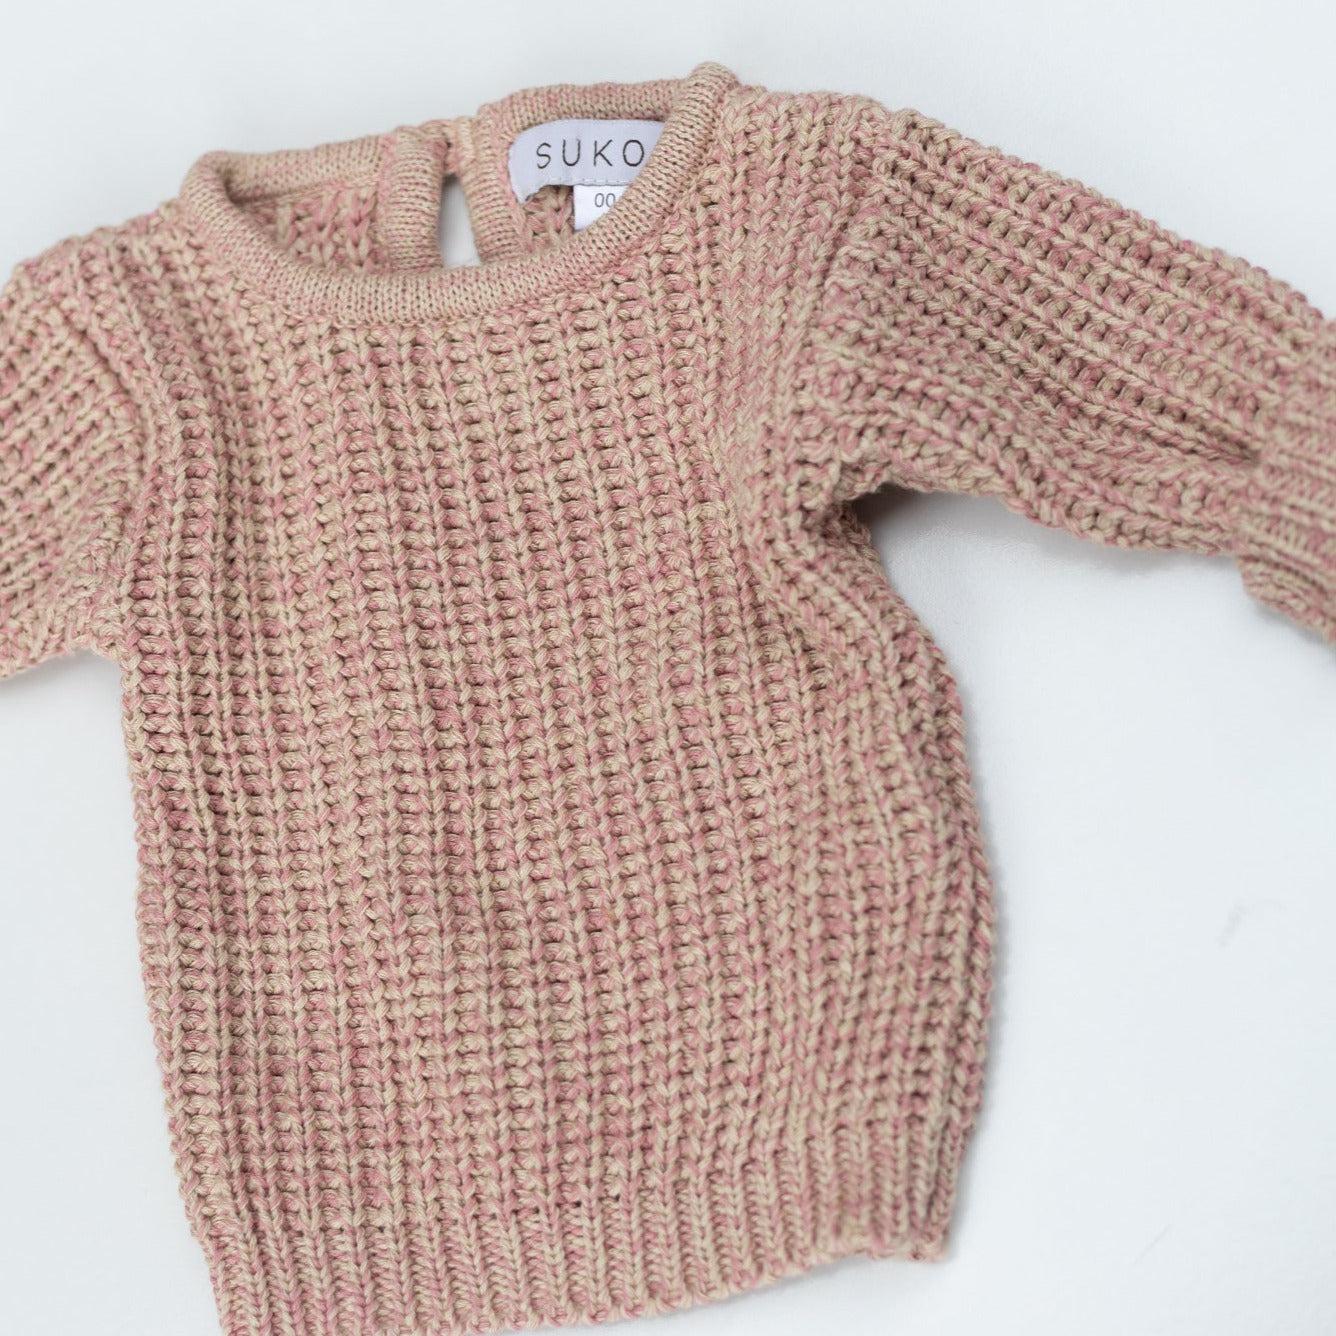 The Zoa knit is lovingly handmade using a loom which is a tool that is guided by the hand. 100% soft cotton, teardrop fastening at back with wood button. Good amount of stretch, considered true to size described as more ‘fitted’.